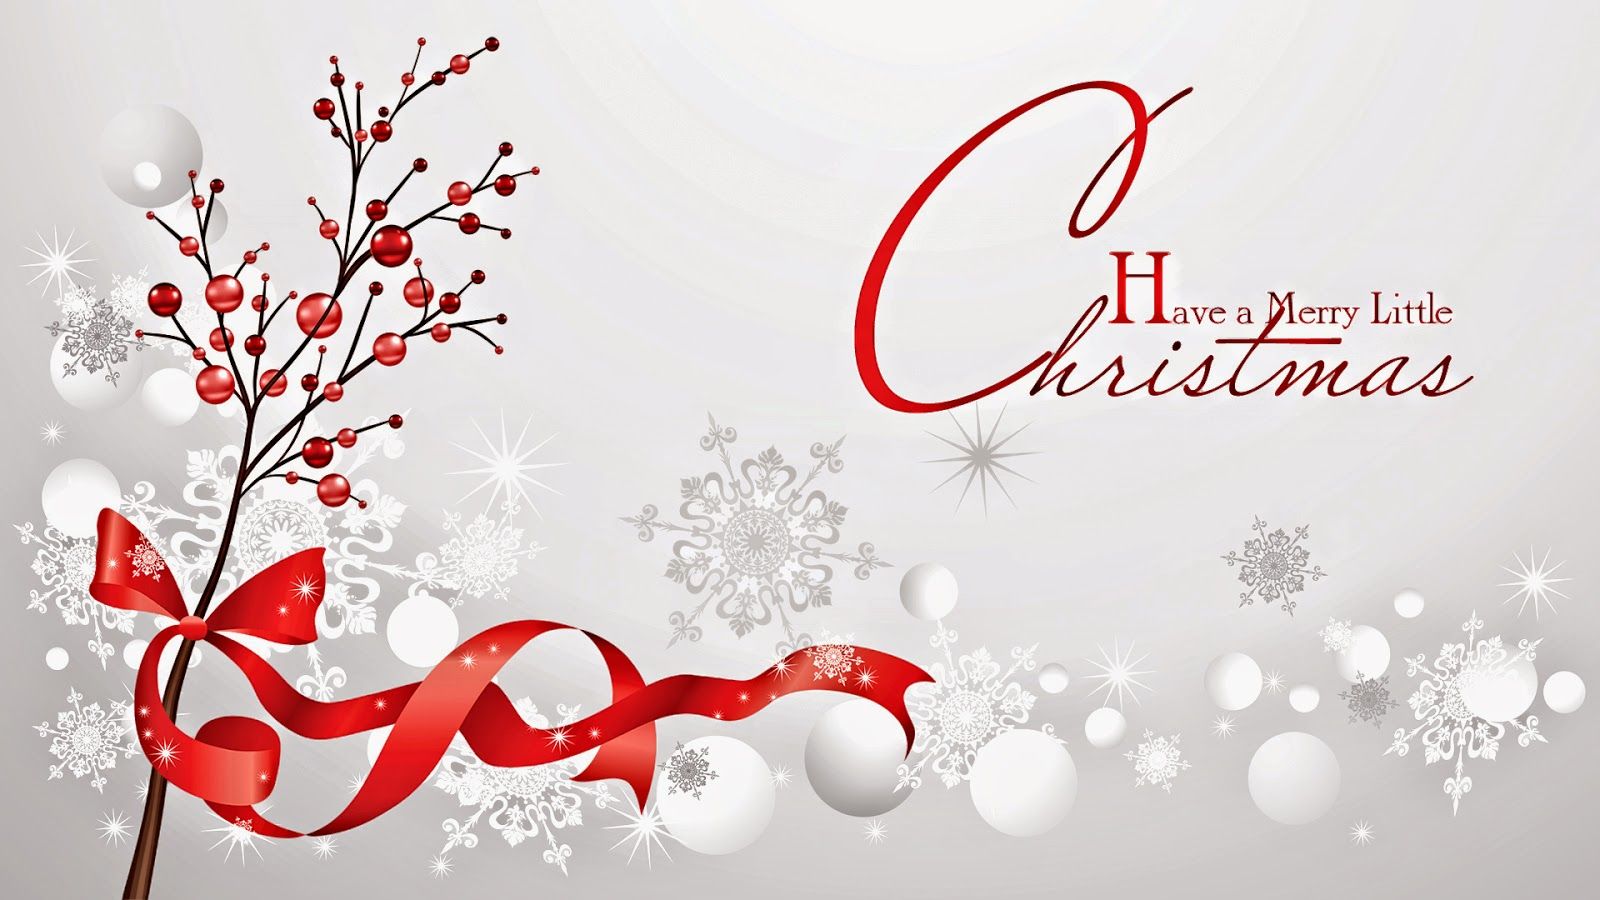 Merry Christmas 2015 New Wallpapers Free Download - Merry Christmas